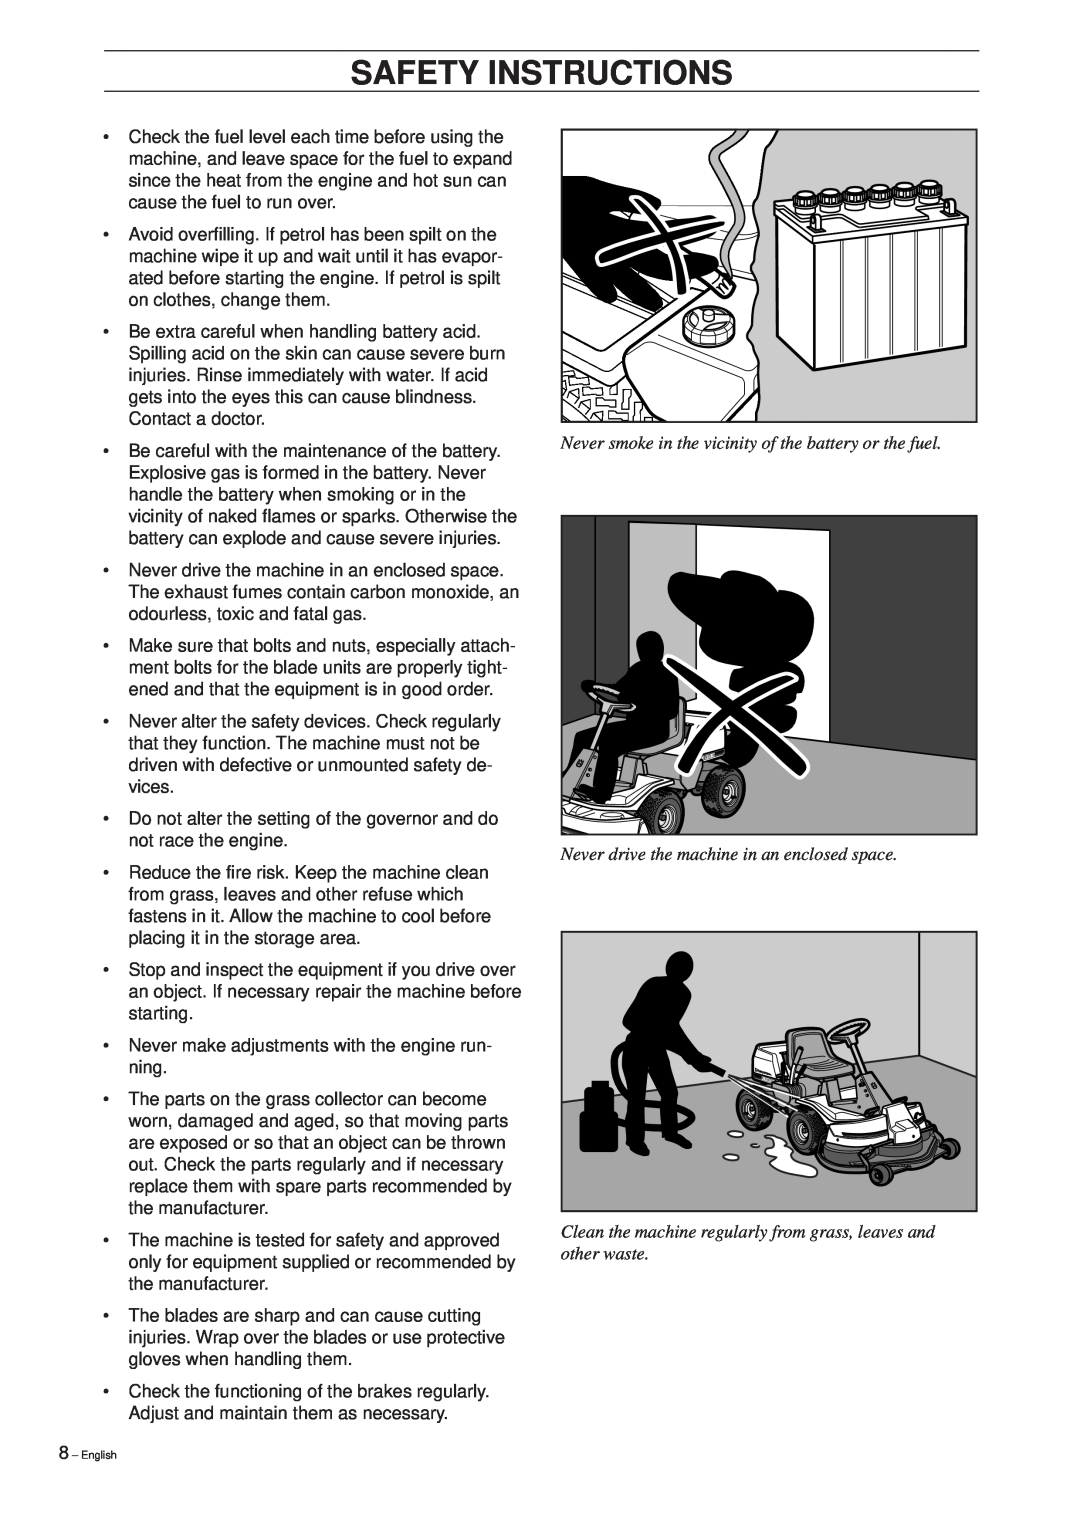 Husqvarna 1200, 1030 BioClip manual Never drive the machine in an enclosed space, Safety Instructions 